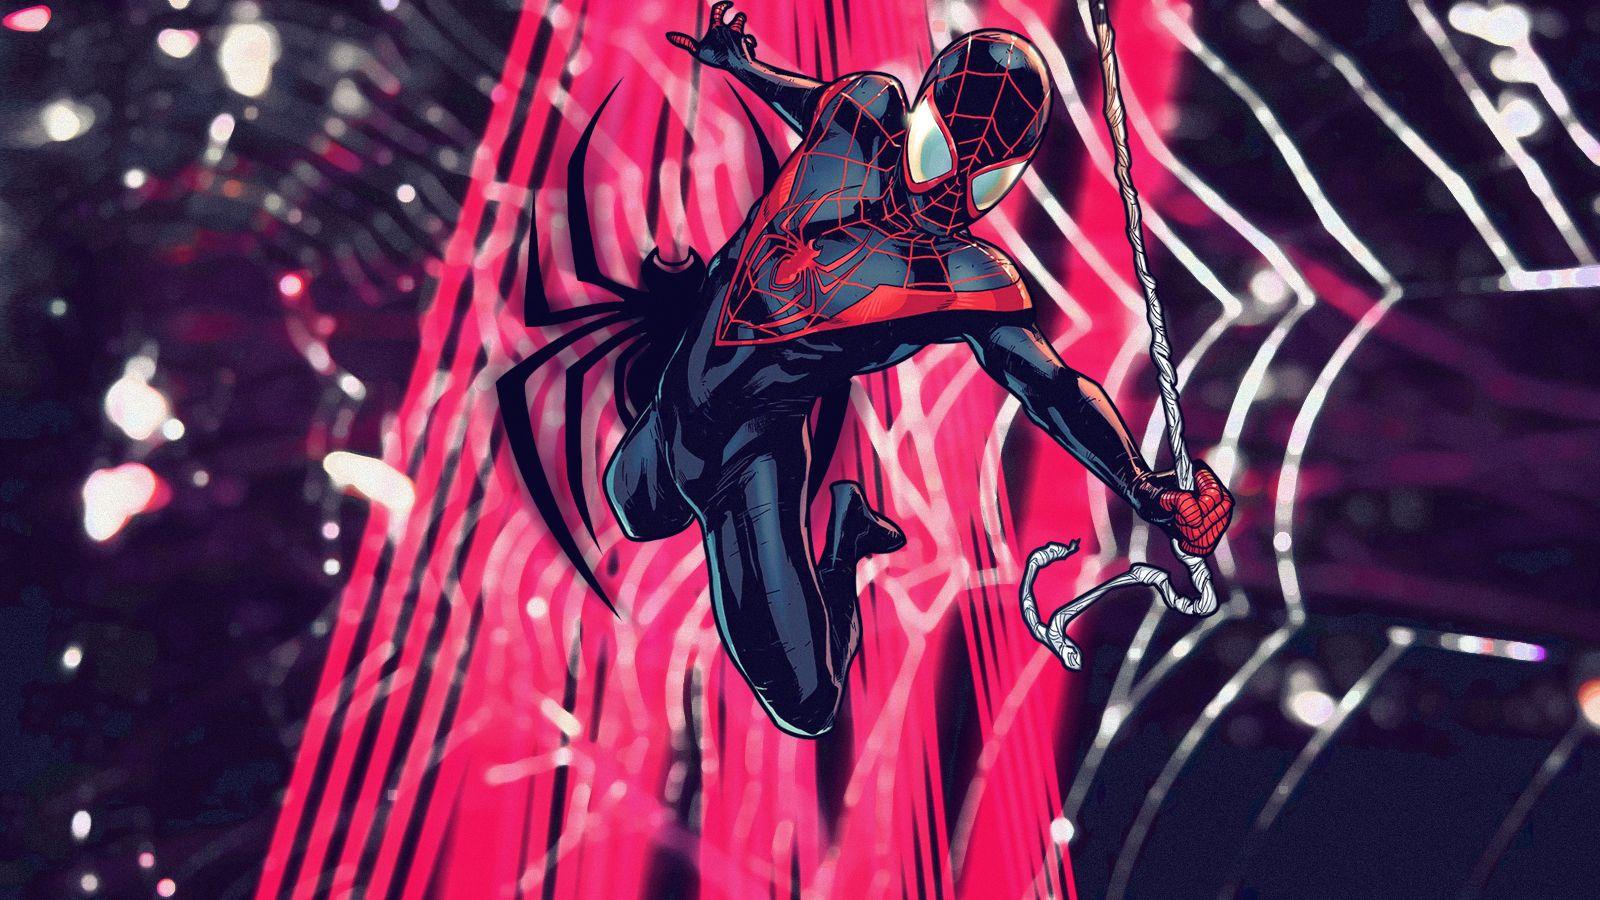 All Spider-Man Wallpapers - Wallpaper Cave